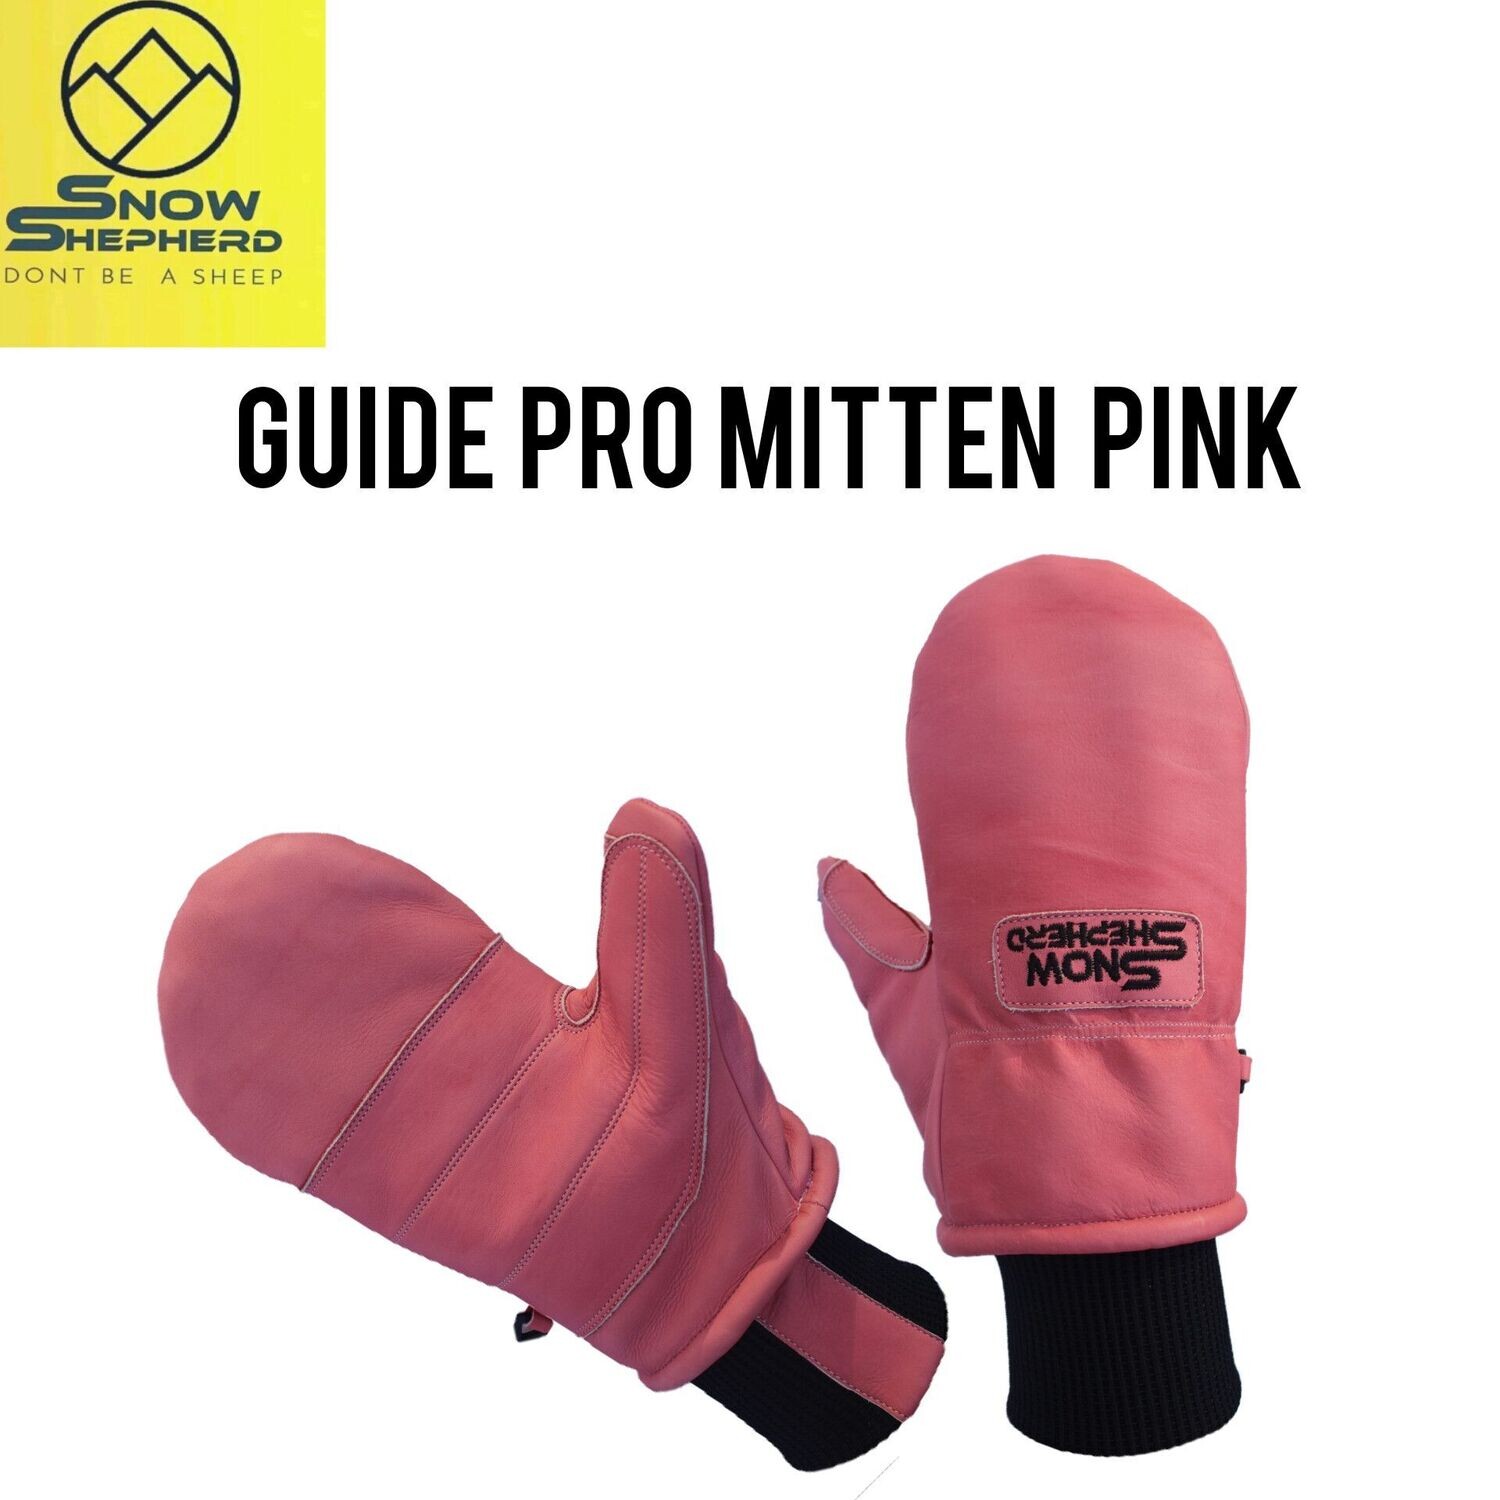 Snowshepherd Leather Ski Guide Pro Mittens Baby Pink